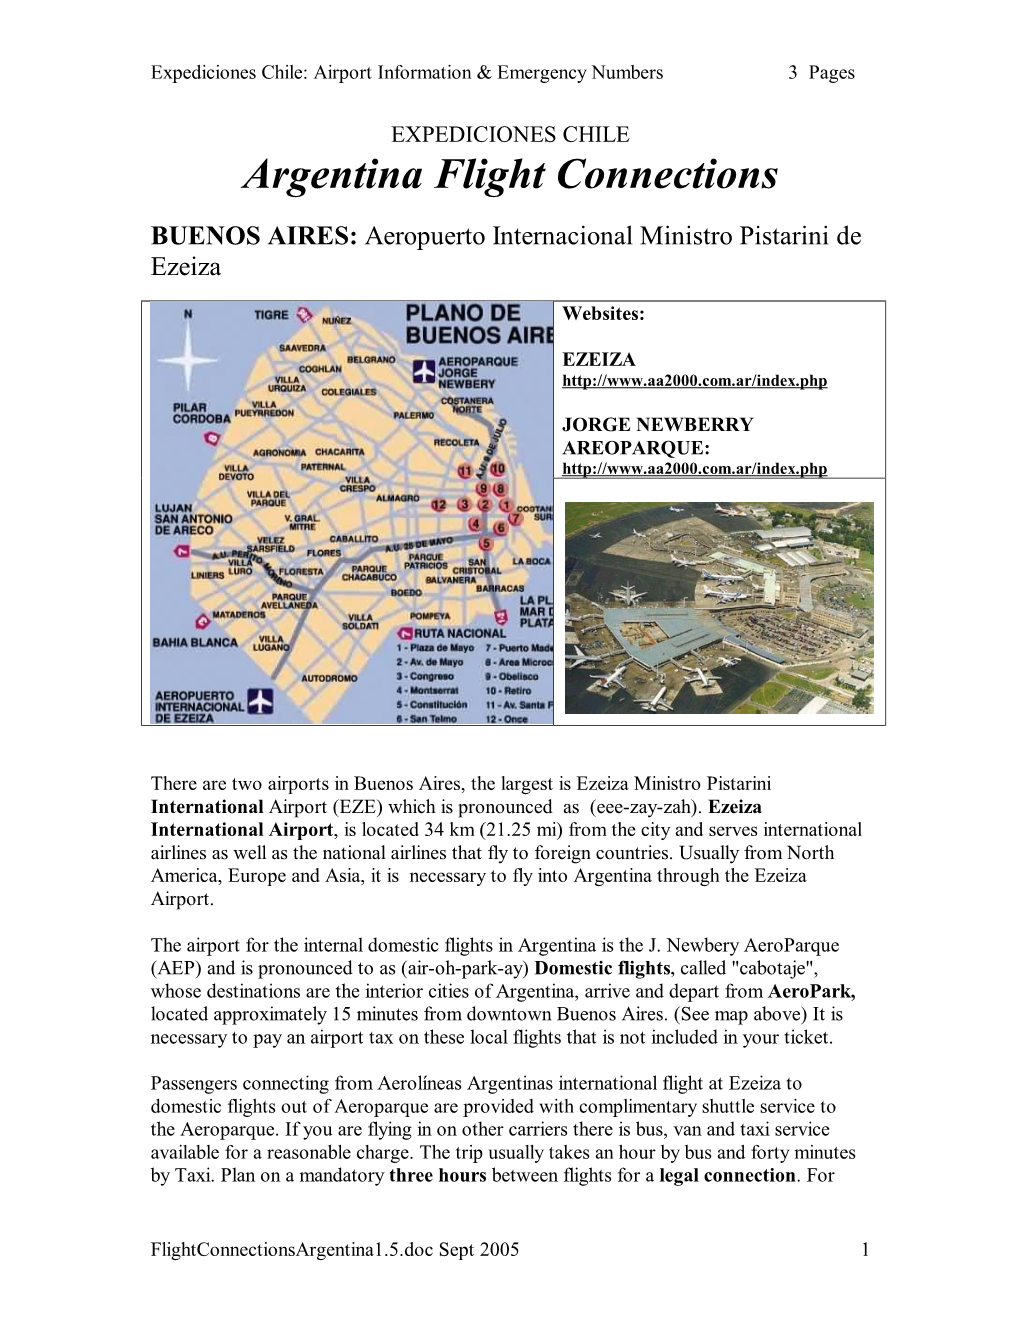 Argentina Flight Connections BUENOS AIRES